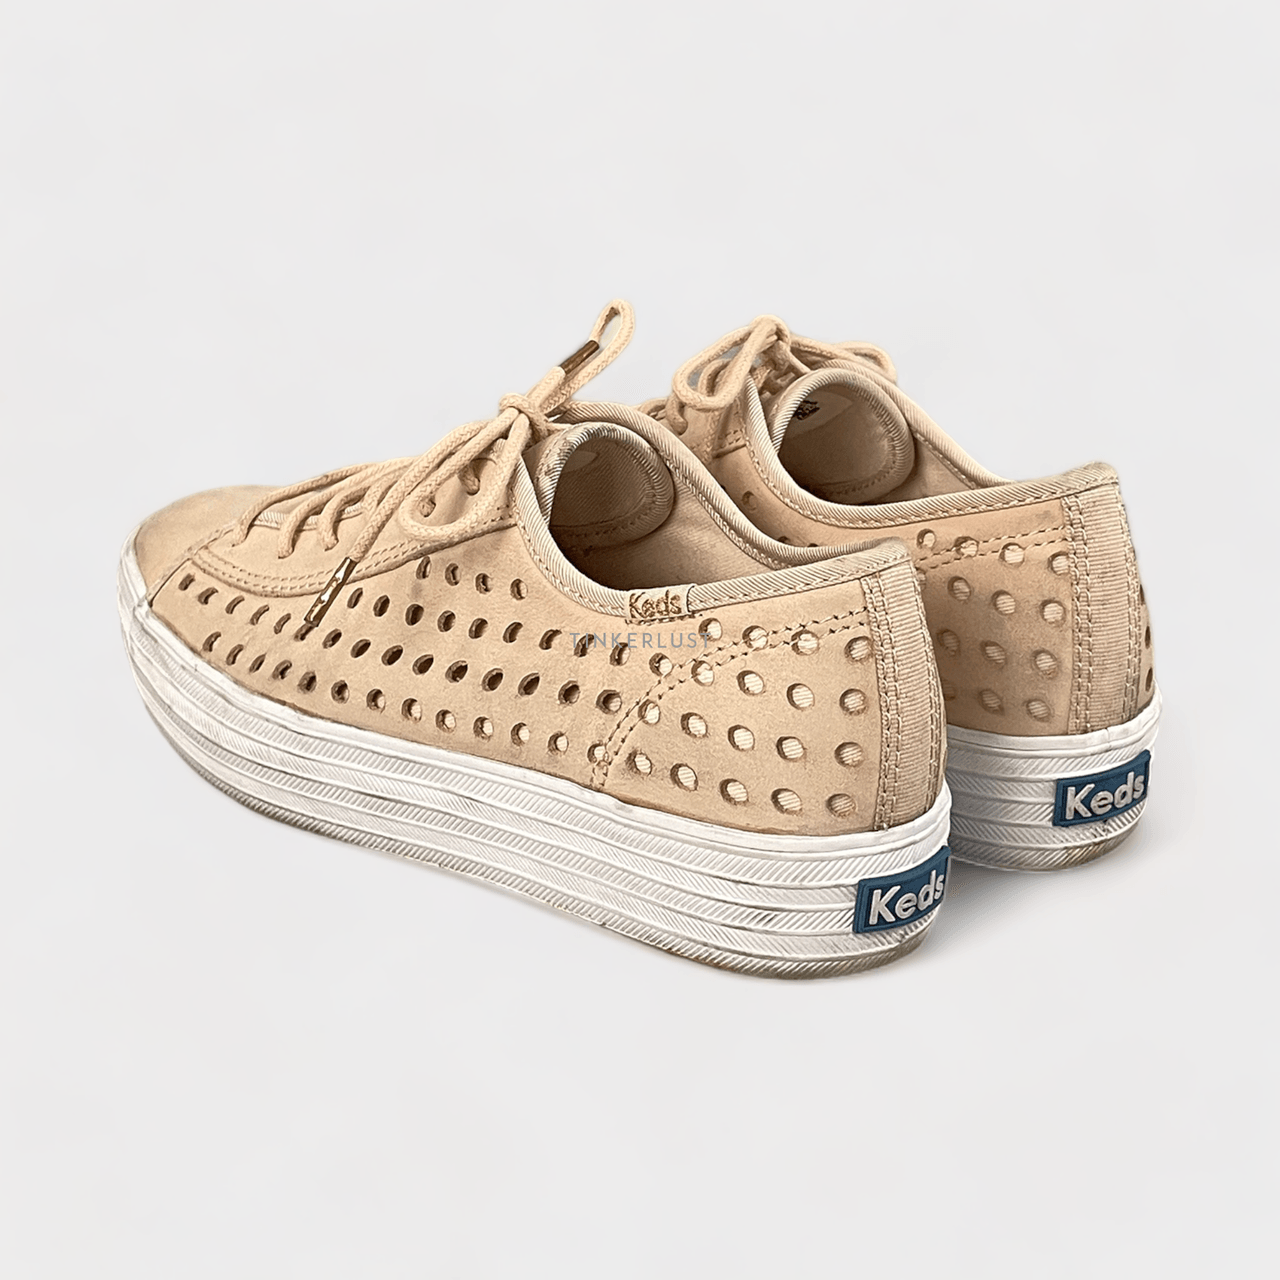 Keds Triple Kick Perf Leather Soft Pink Sneakers